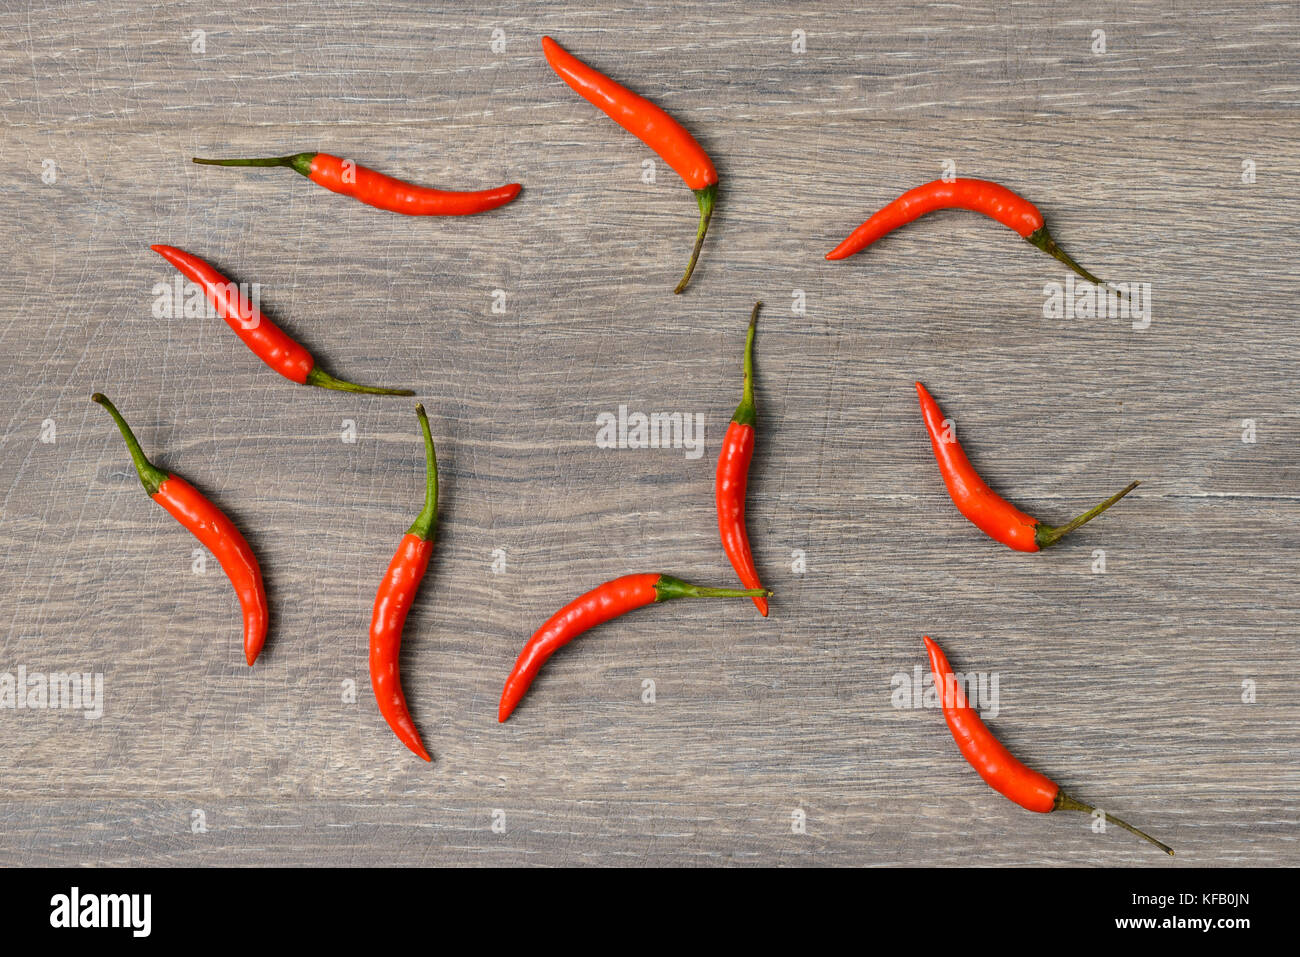 Red hot chili pepper on wooden table Banque D'Images